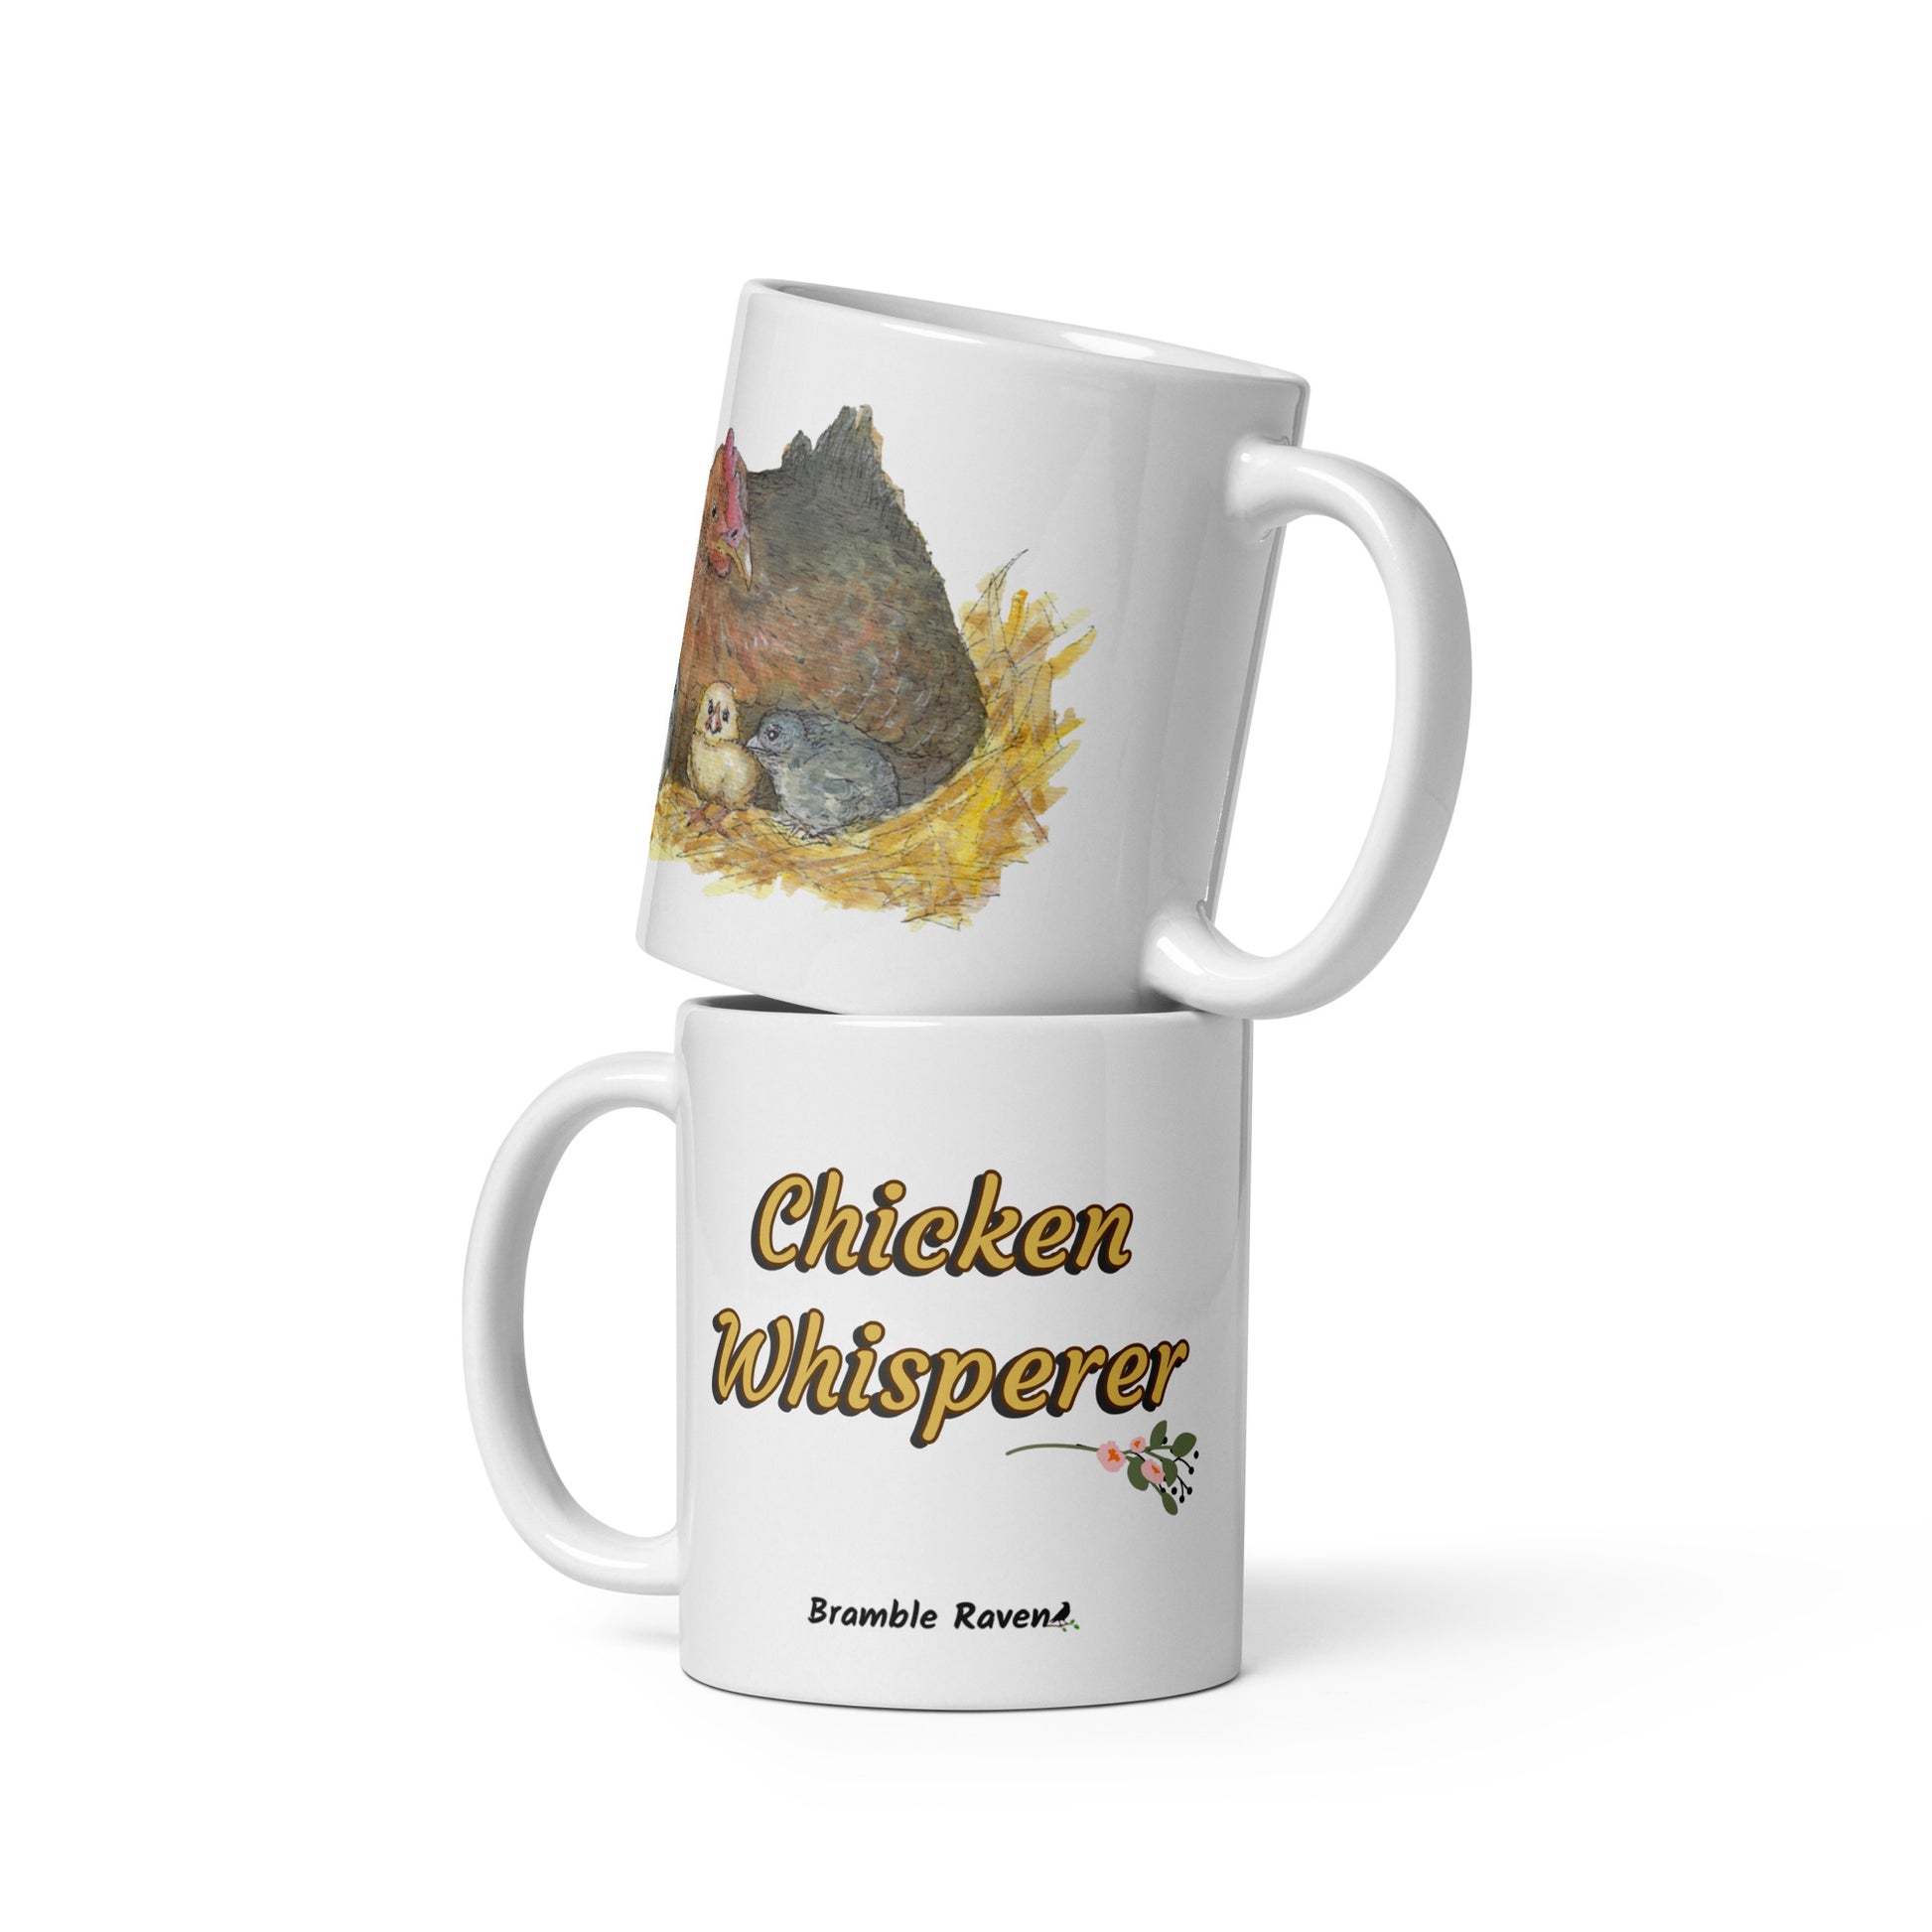 11 ounce white ceramic chicken whisperer mug. Features print of watercolor mother hen and chicks on one side and chicken whisperer text on the other. Dishwasher and microwave safe. Image shows two mugs stacked.